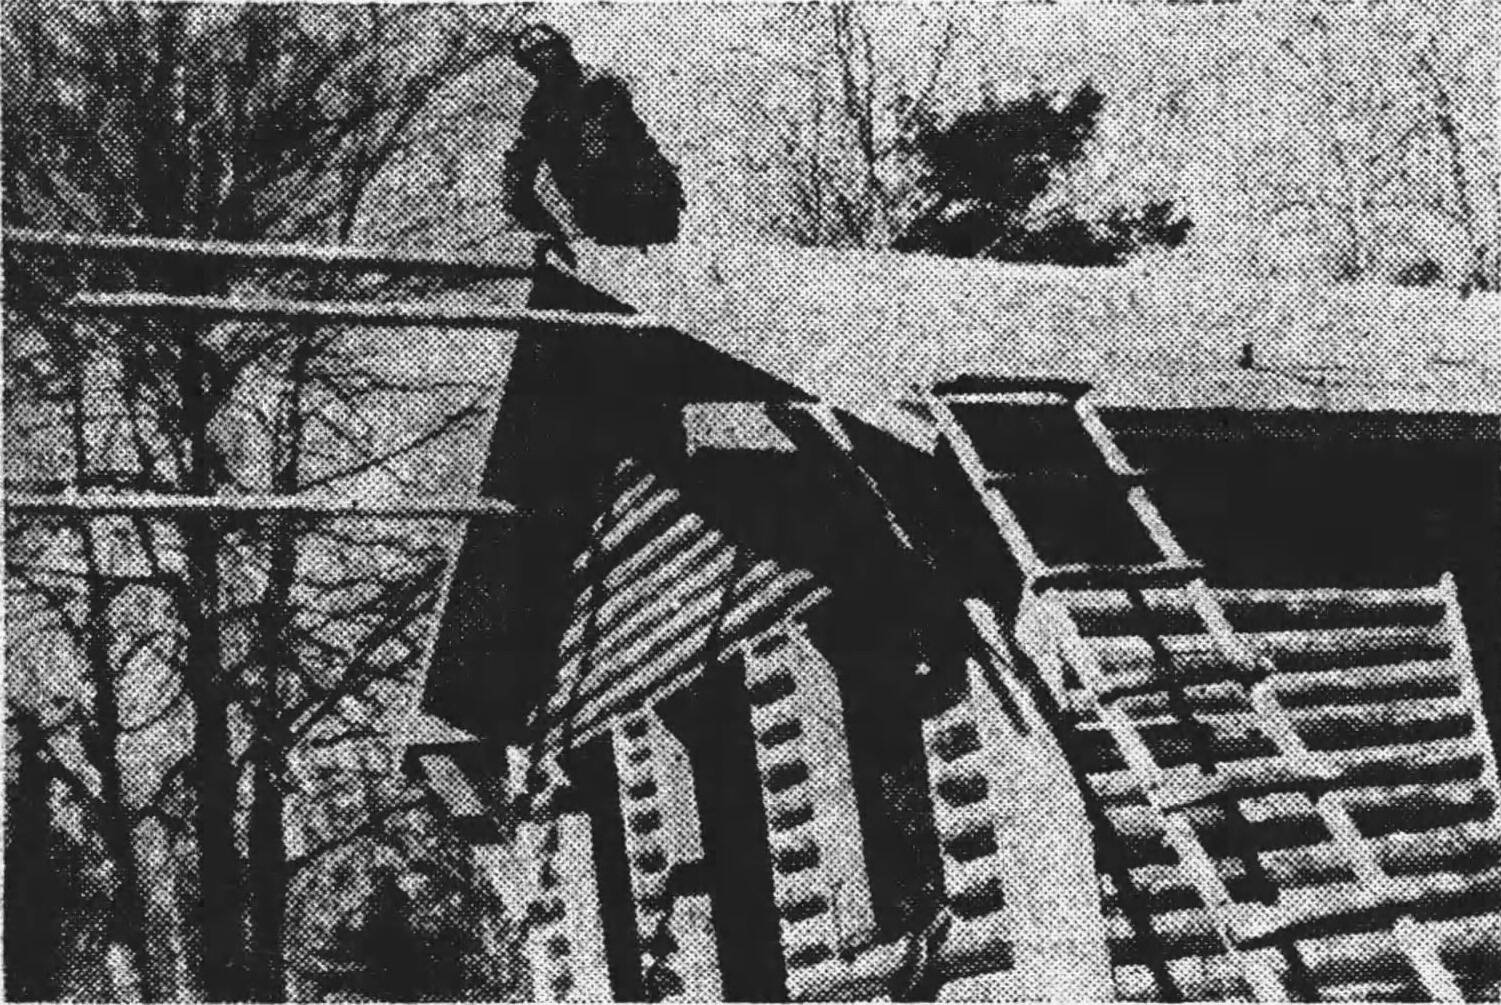 In this photo from the March 10, 1949, edition of the Wayne (Nebraska) Herald, Soldotna homesteader Marvin Smith is seen working on the roof of his cabin along the Kenai River.